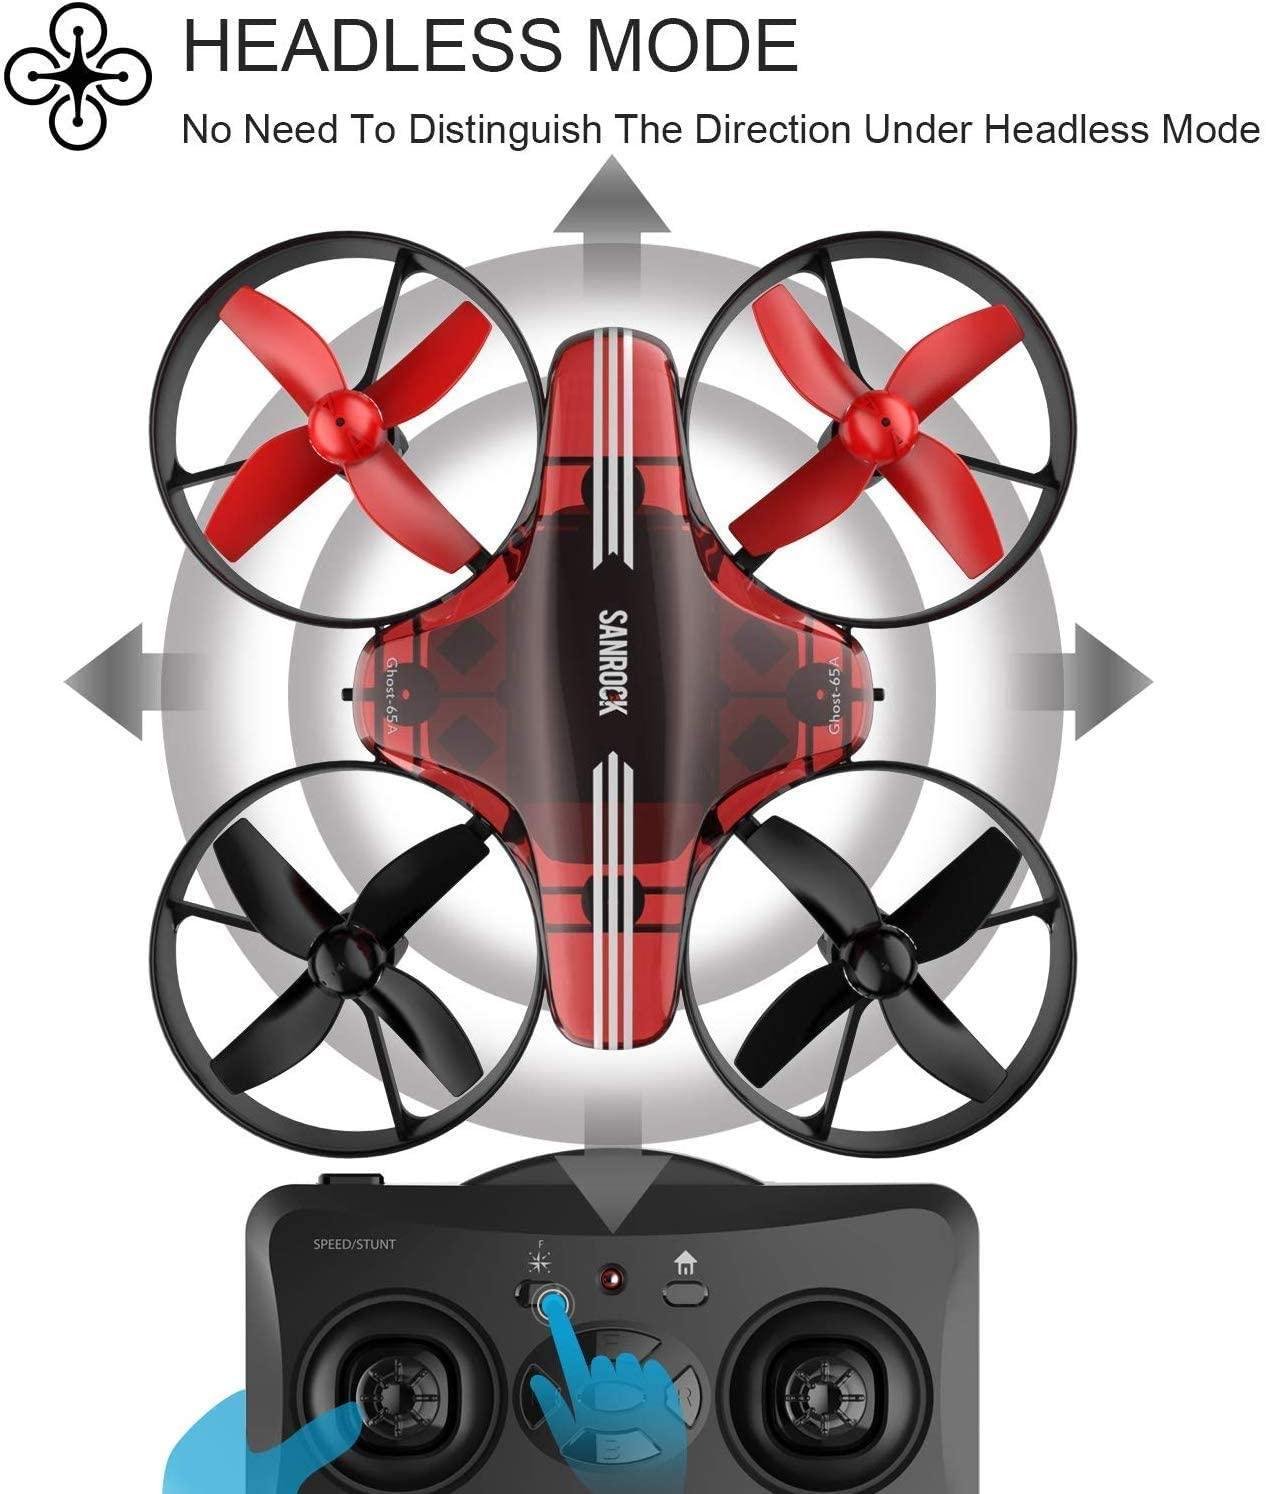 SANROCK GD65A Drone - for Kids and Beginners, RC Helicopter Support Headless Mode, Altitude Hold, 3D Flip, One key return, with 2 Batteries, Great Gift/Toys for Boys and Girls - RCDrone